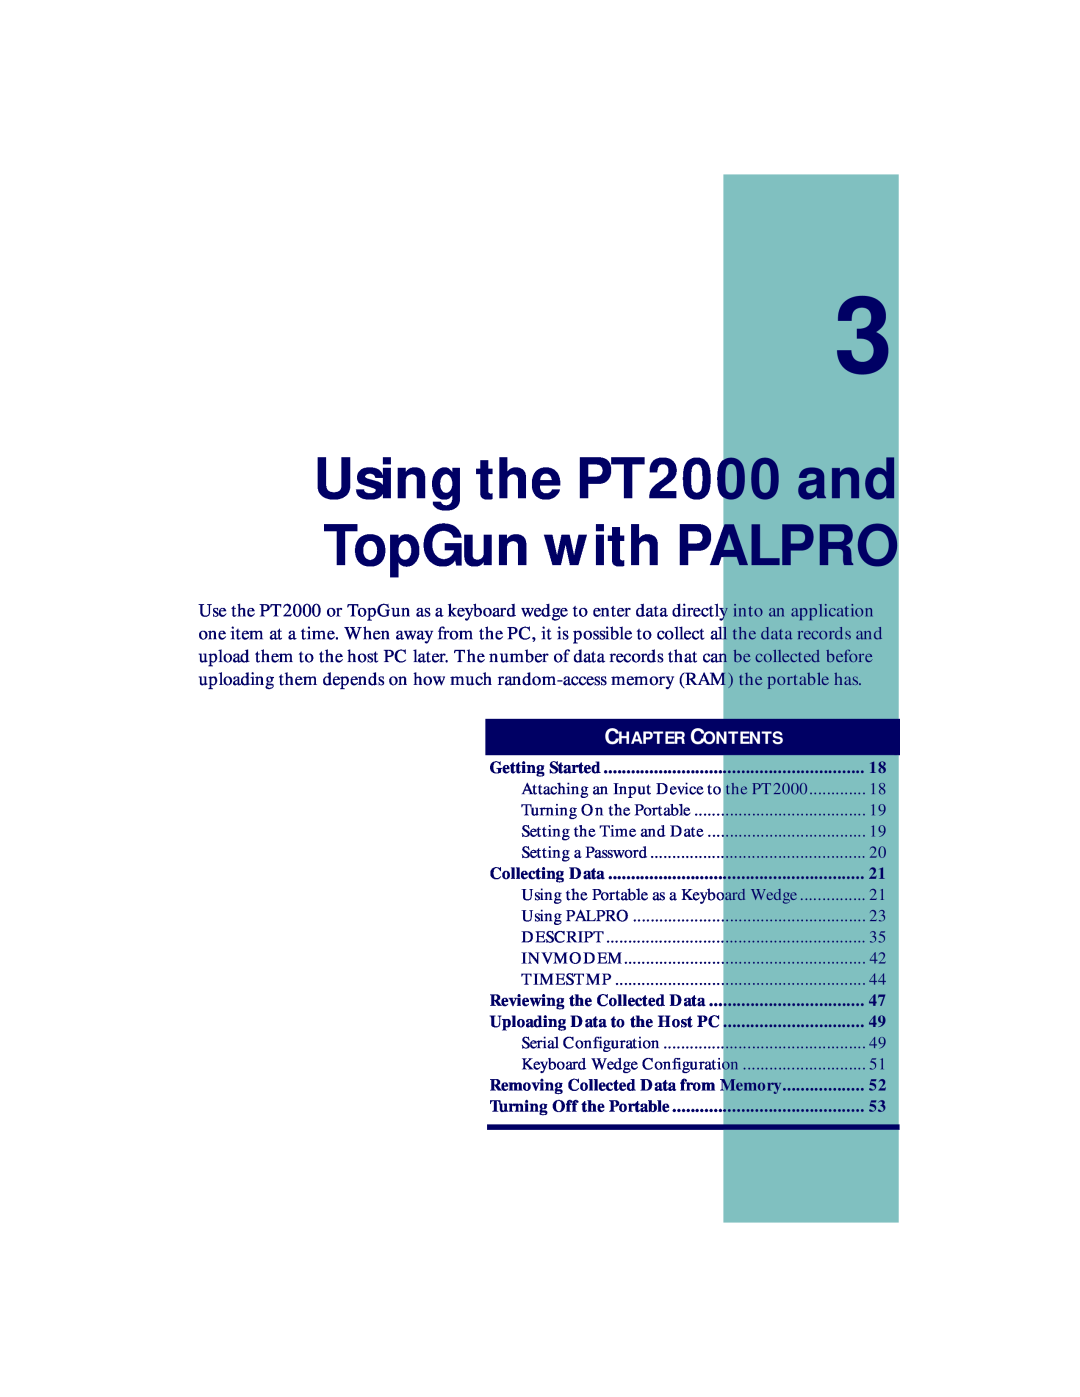 PSC manual Using the PT2000 and TopGun with PALPRO, Getting Started, Collecting Data, Reviewing the Collected Data 